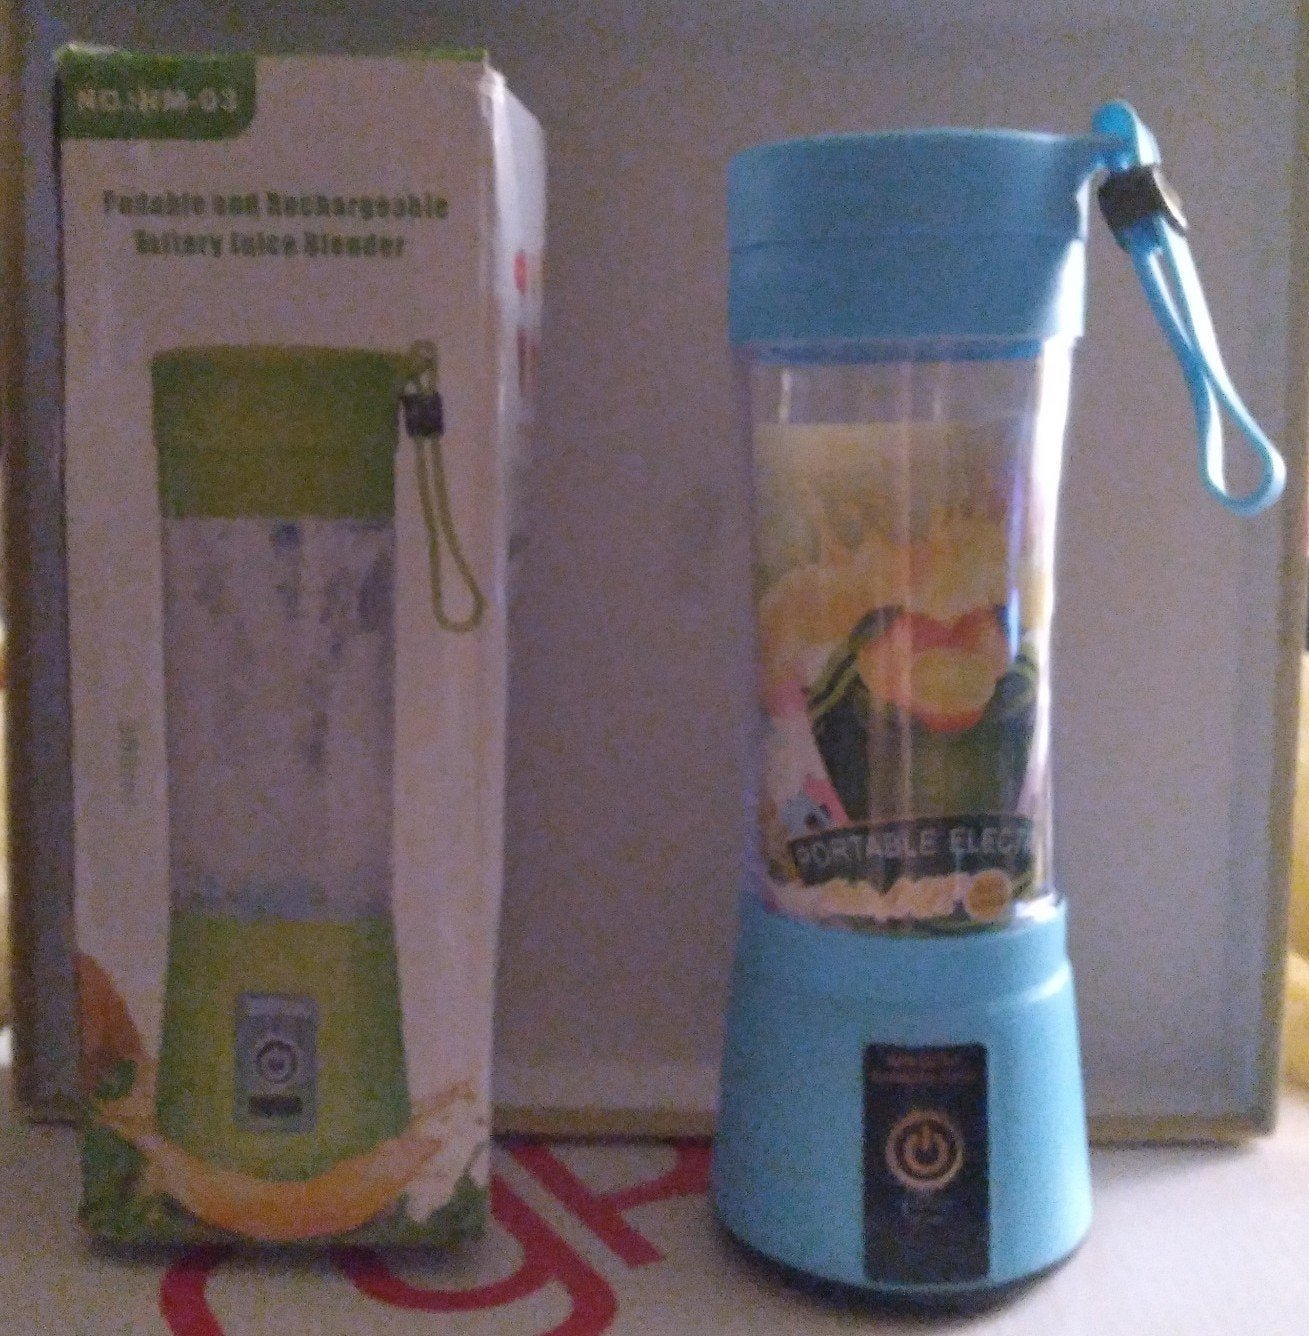 Juice Blender. Portable and rechargeable nKI1JfmlG